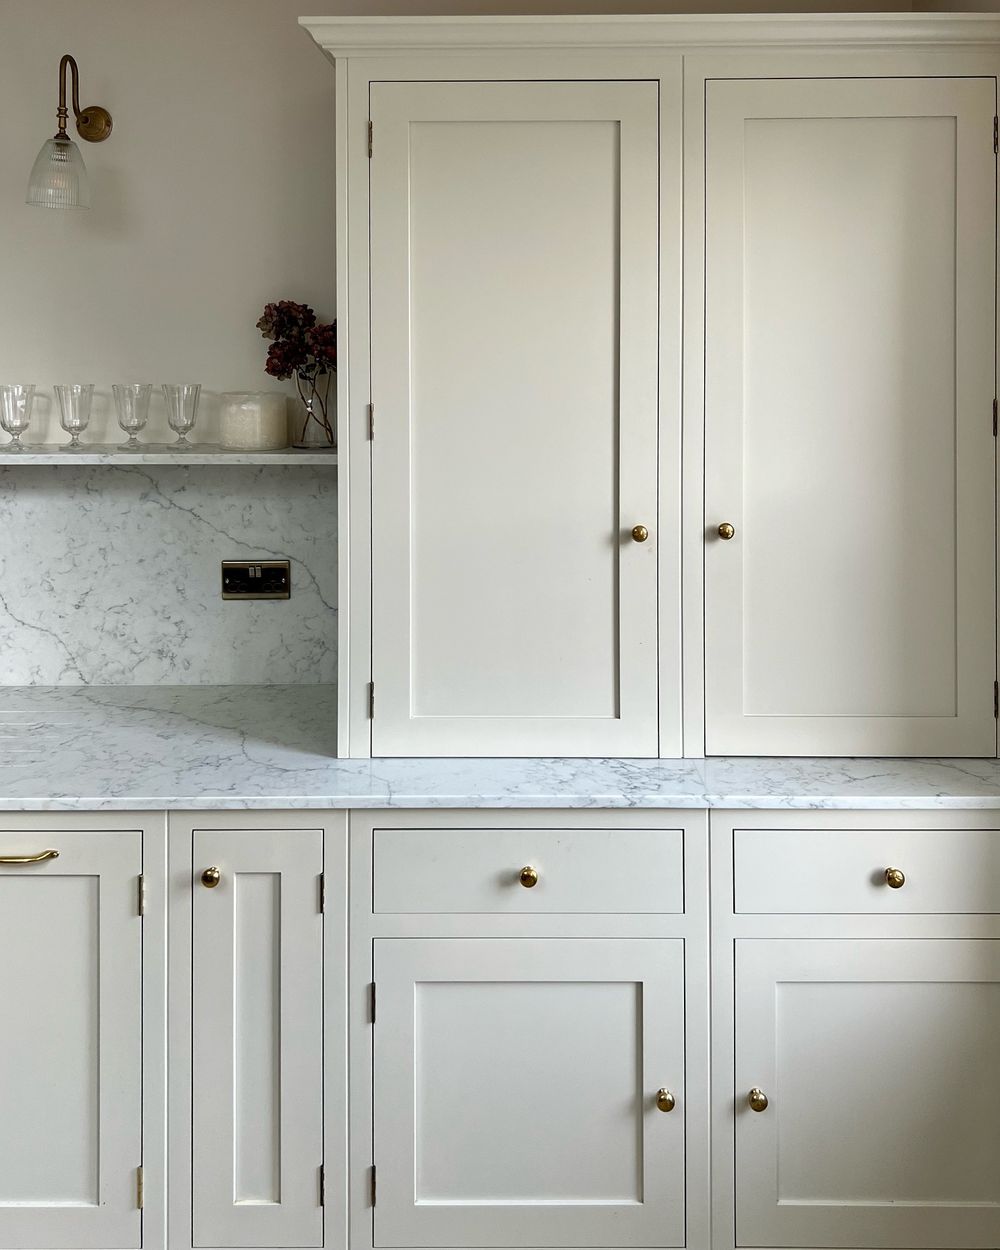 Marble kitchen countertops Cream cabinets thislondonedwardian